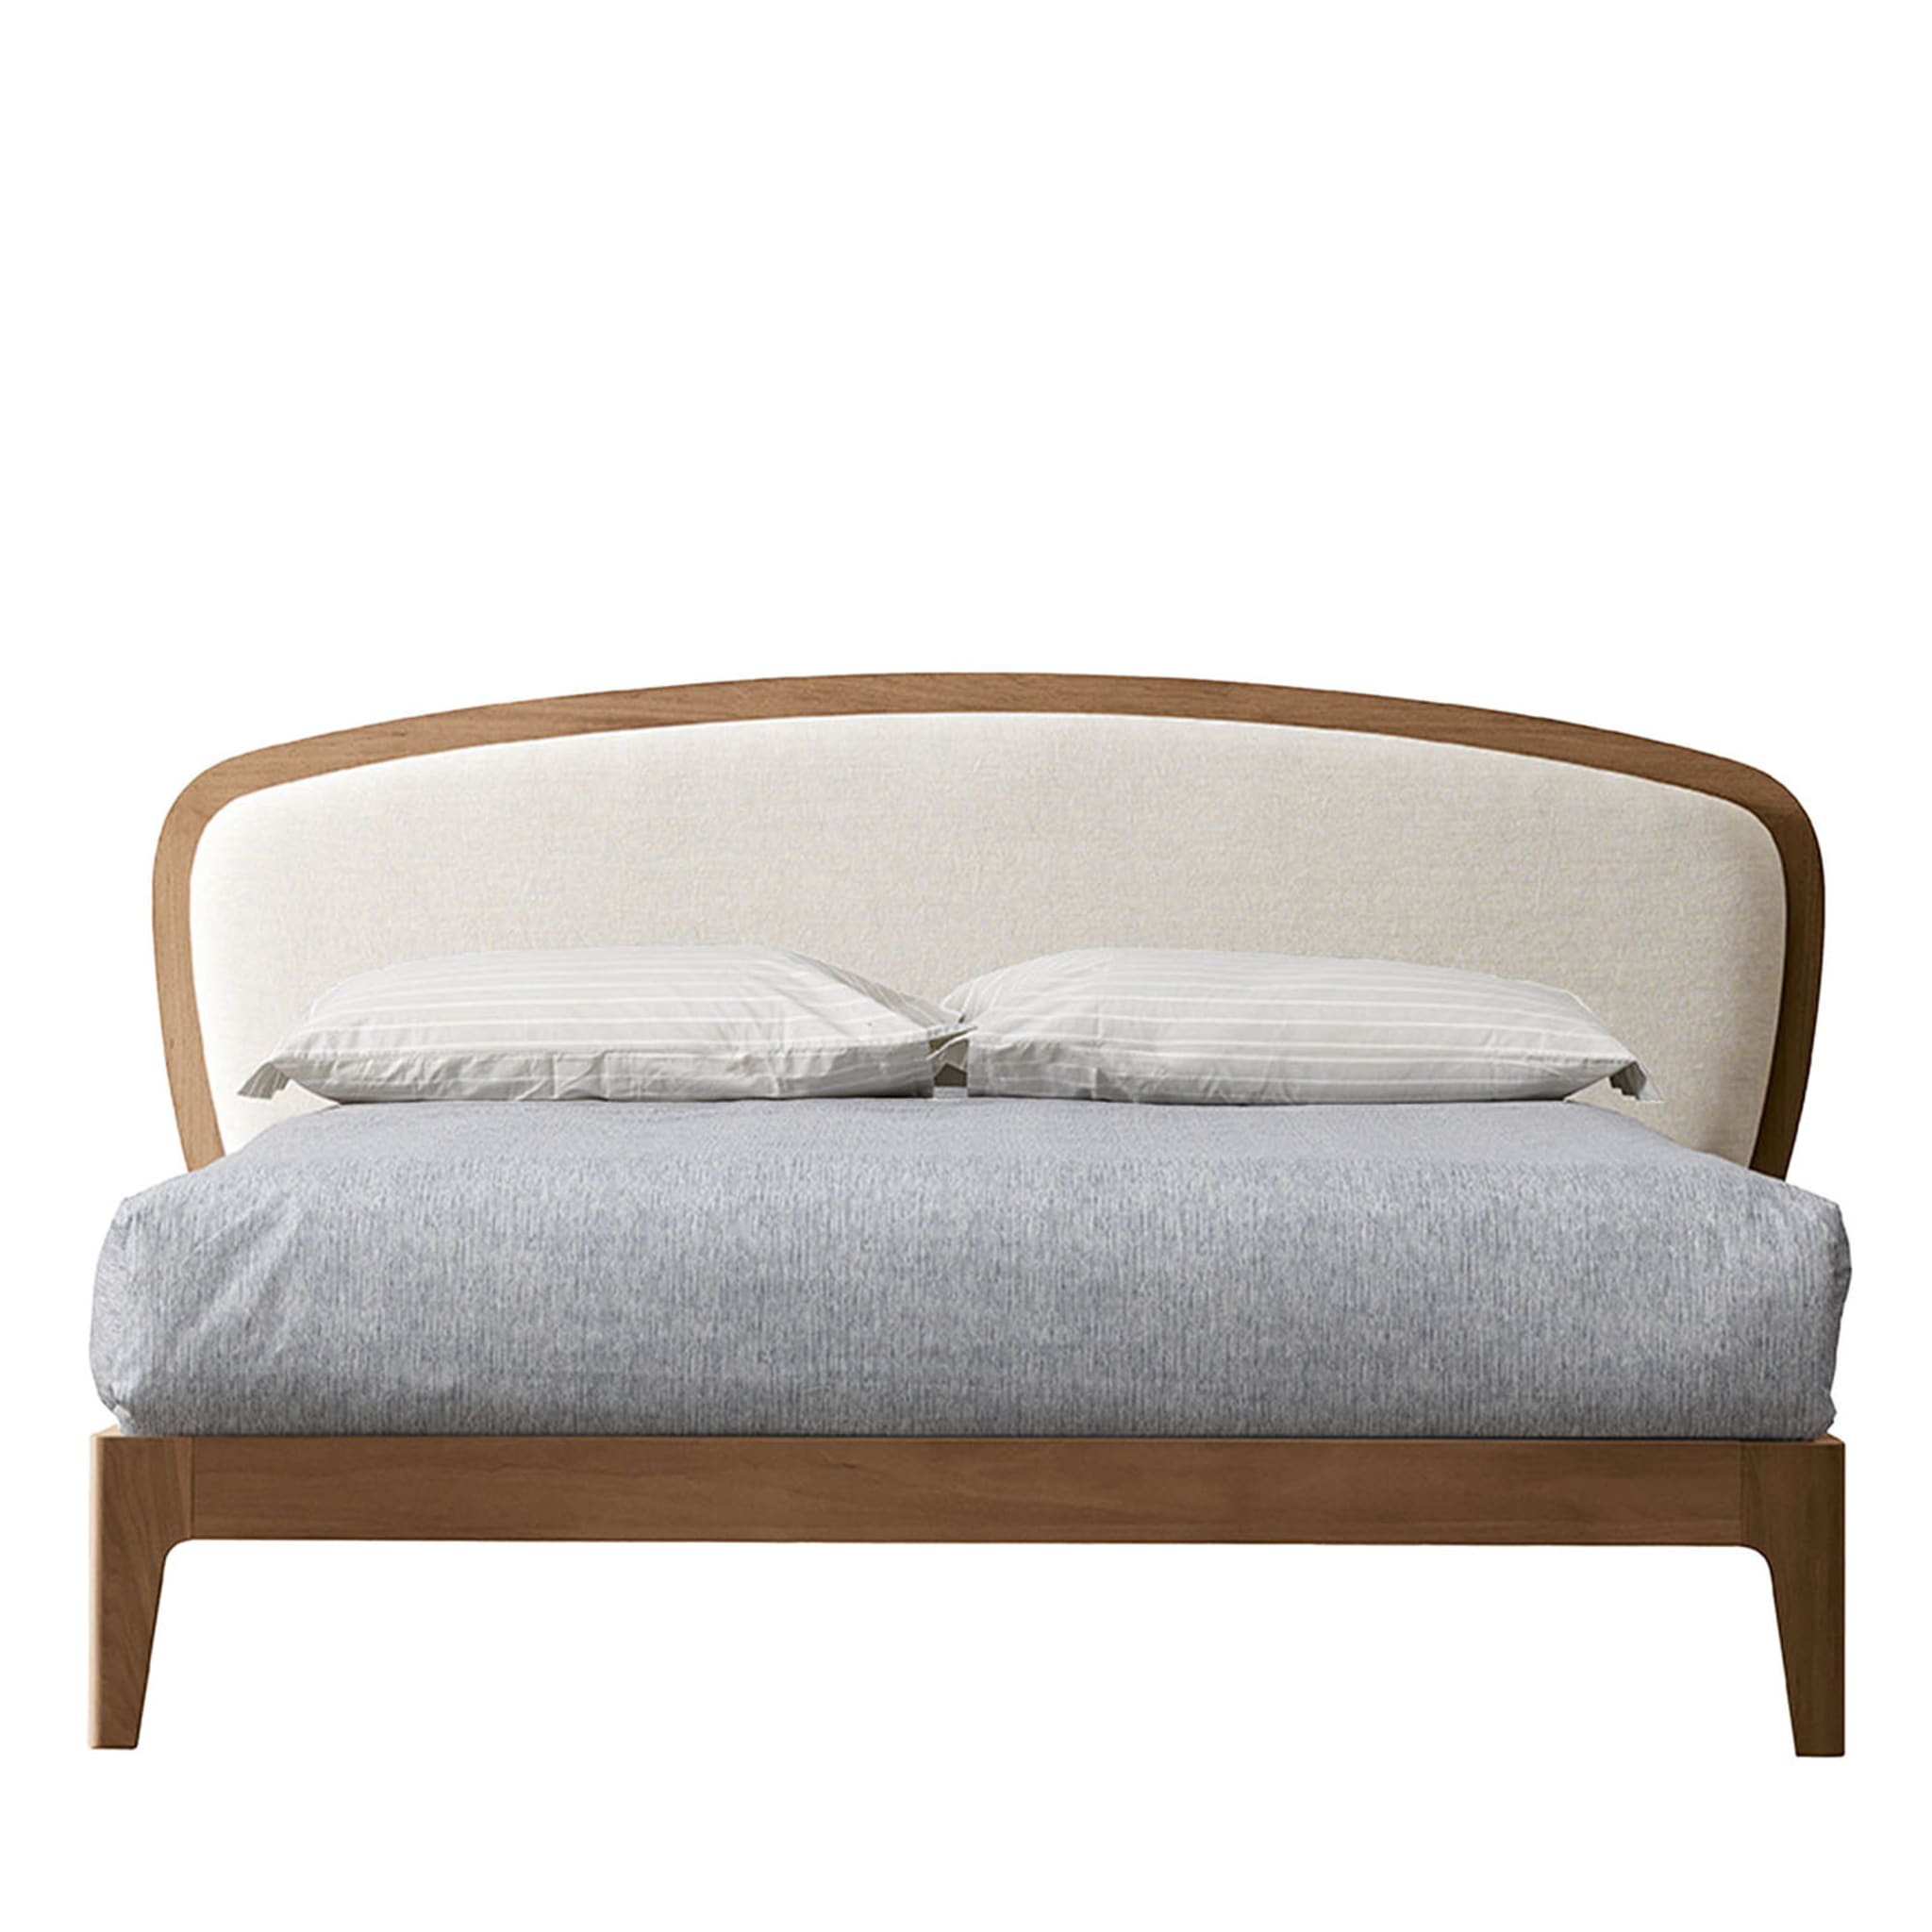 Battlò Bed in Canaletto Walnut Wood With Linen Upholstery  - Main view